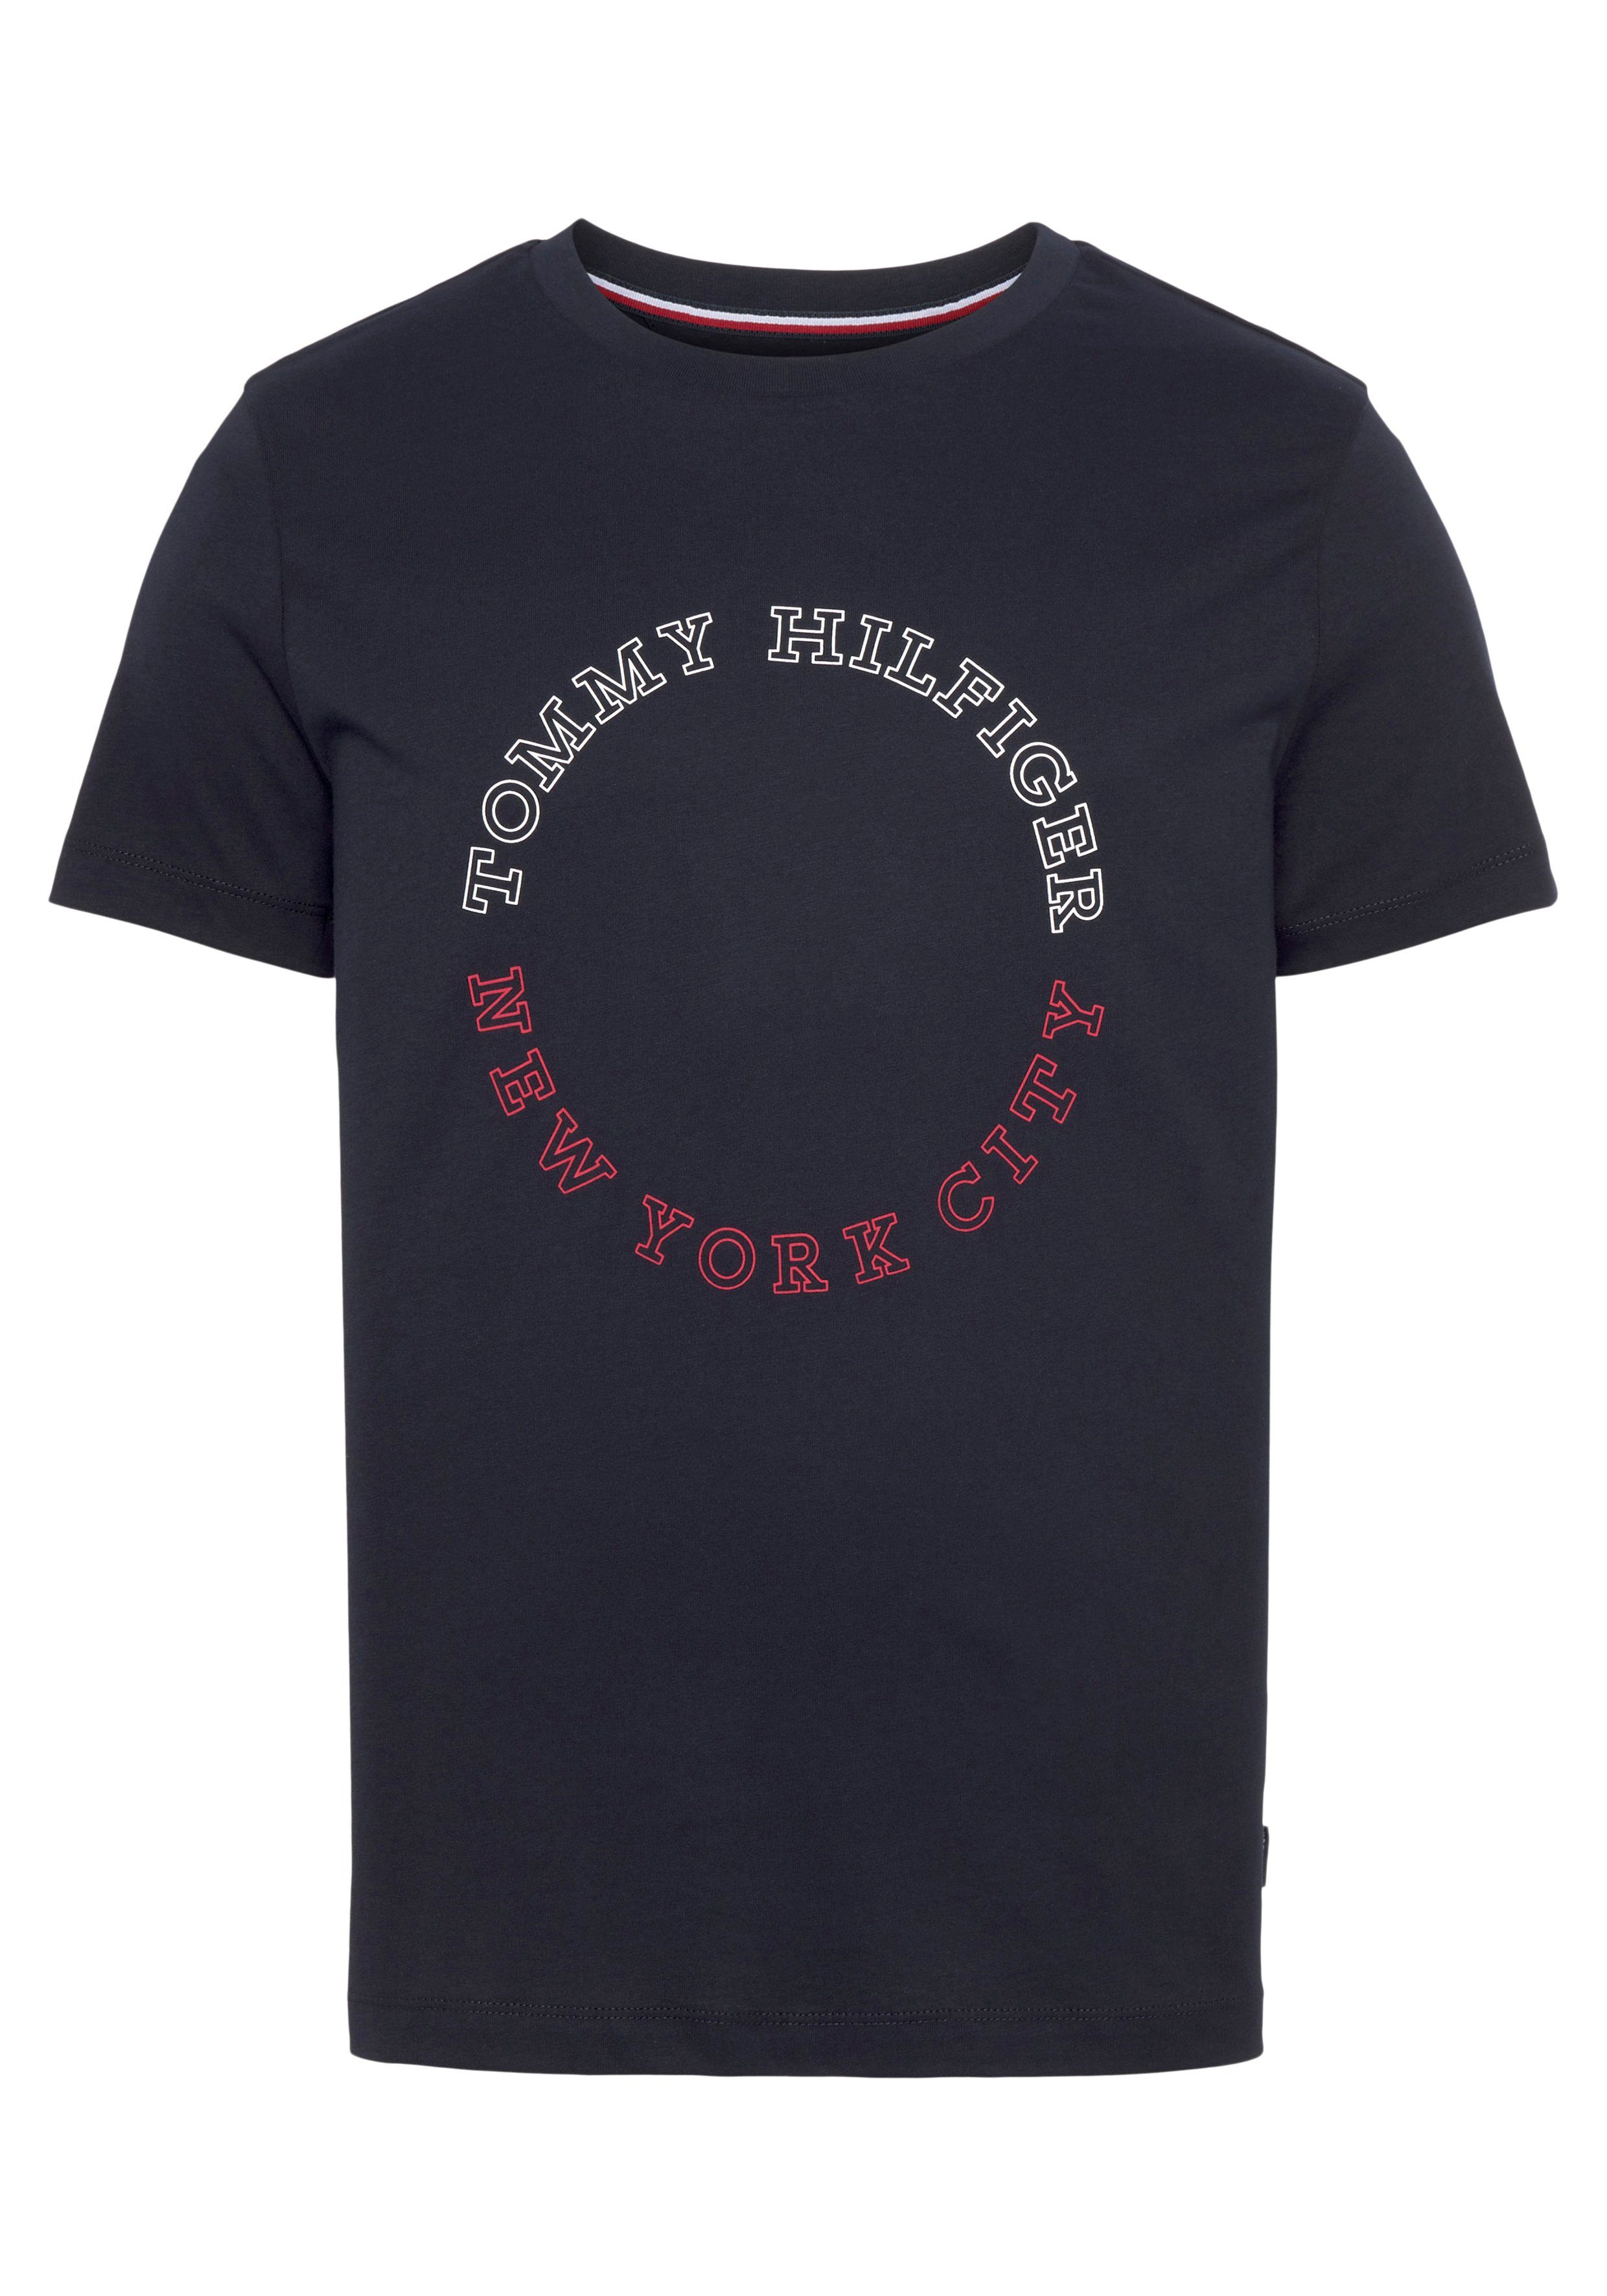 MONOTYPE T-Shirt Tommy Hilfiger ROUNDLE des.sky TEE